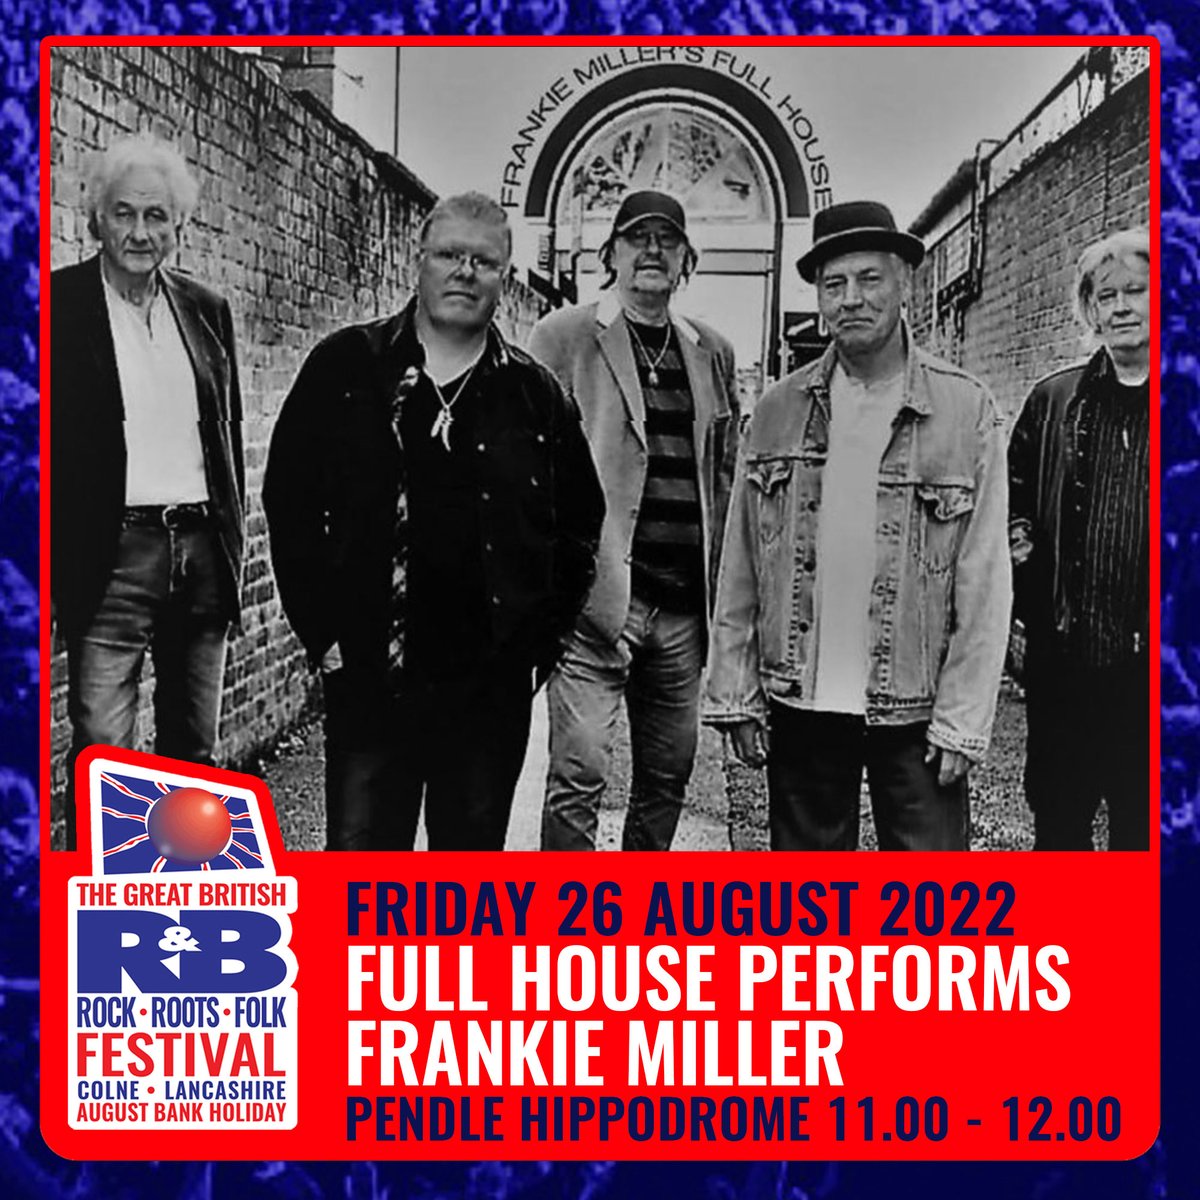 What a way to close the Friday night @pendlehippo! 🙌 ‘Fullhouse performs Frankie Miller’ will take to the stage performing the classic songs which they love just as much as the fans. Tickets are selling out fast for this one. Get yours here 👇 colneblueslineup.com/get-tickets